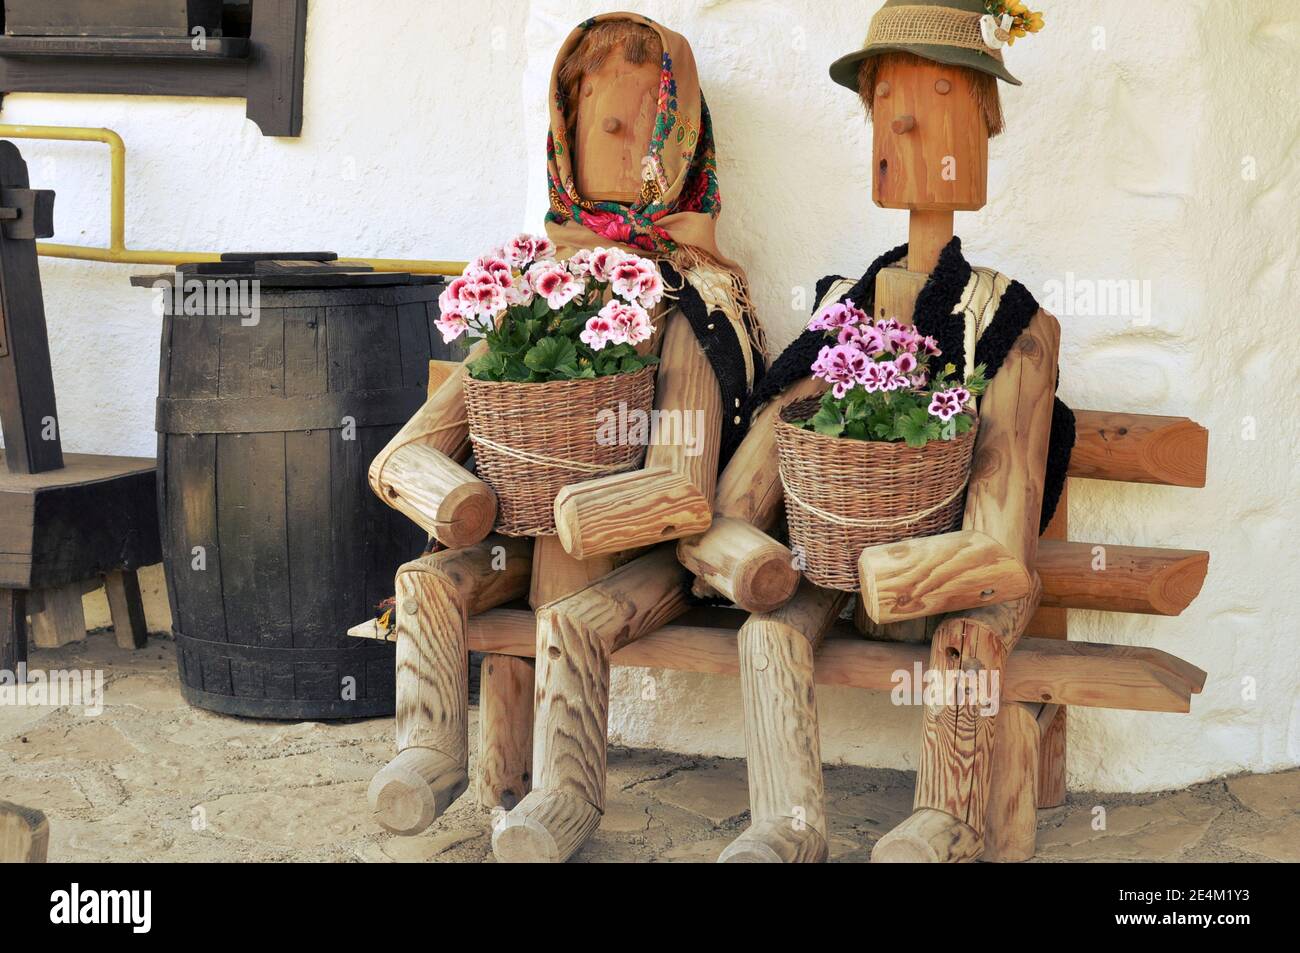 Wooden decorative toys sitting on a bench in front of a house with flower pot in hands. Filter applied. Stock Photo